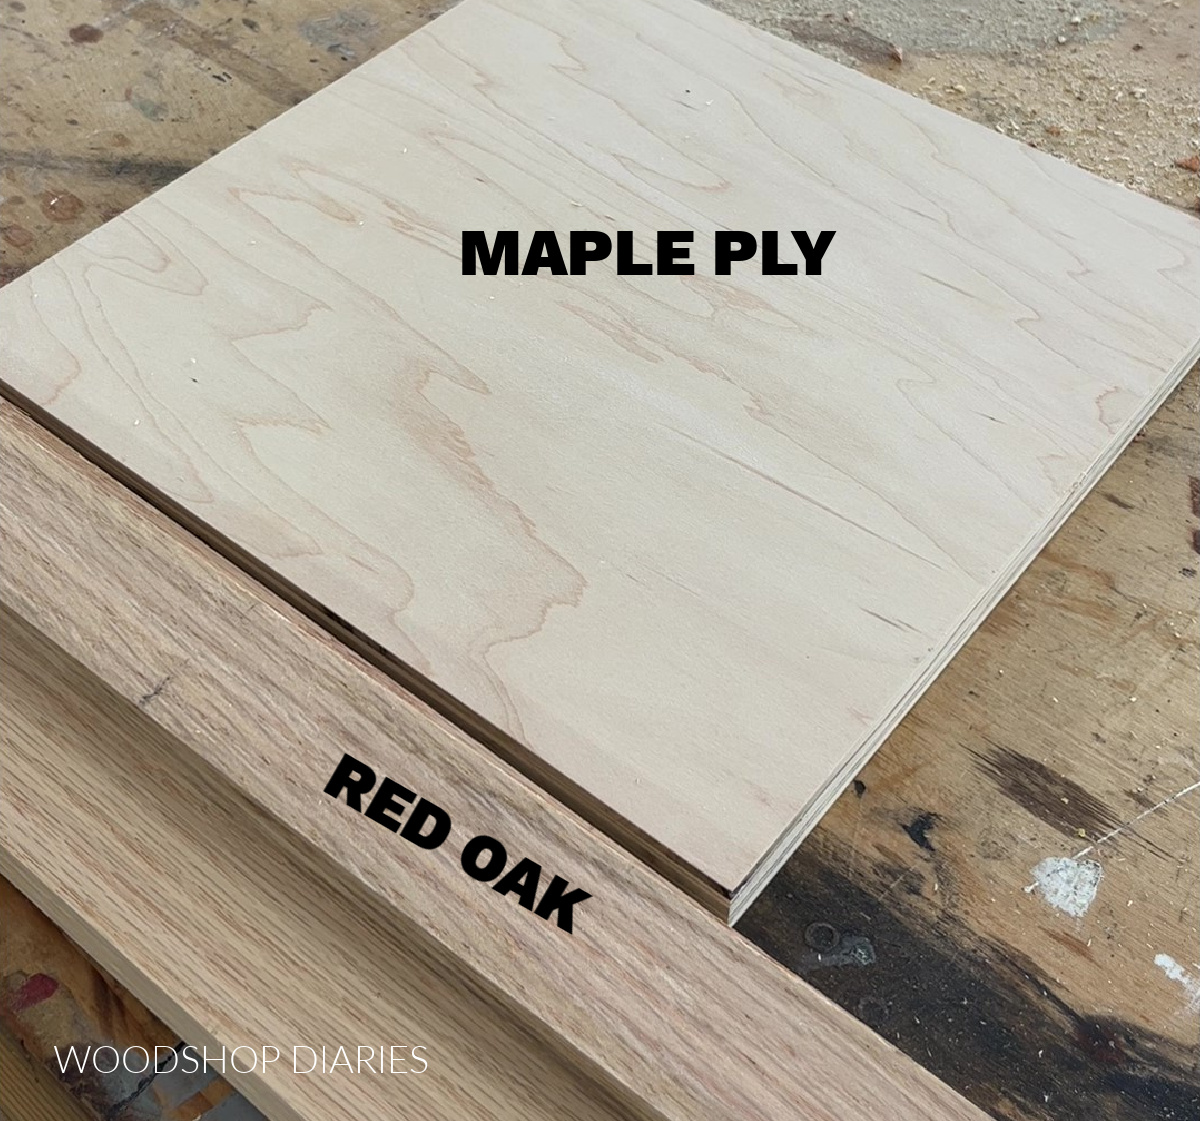 Maple plywood square and red oak scrap boards laying on workbench surface